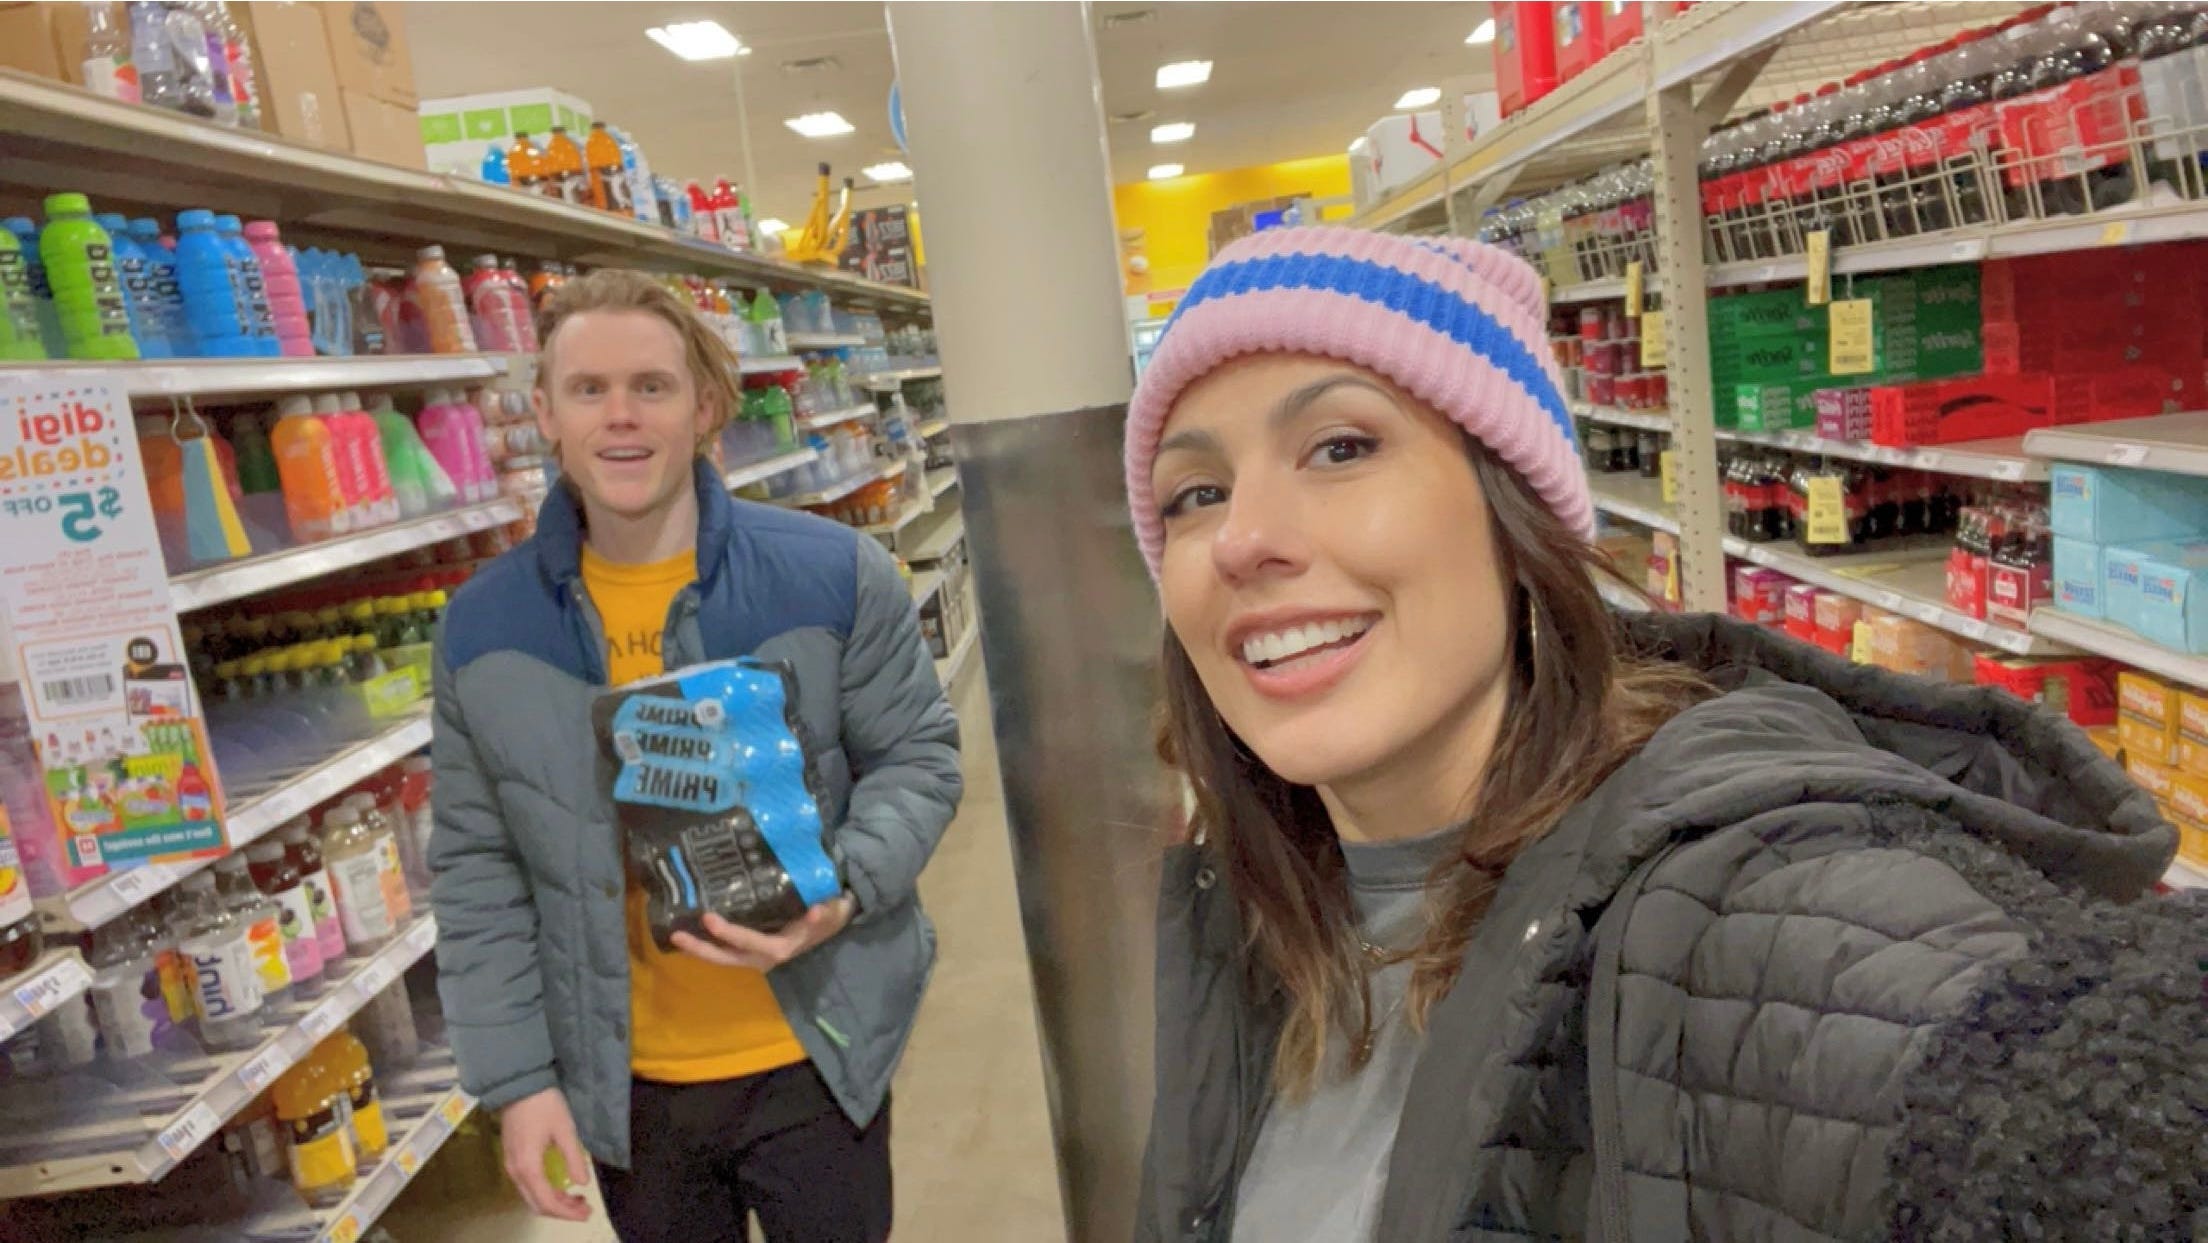 andrea valdez and brandon wells at the grocery store with a case of blue prime drinks